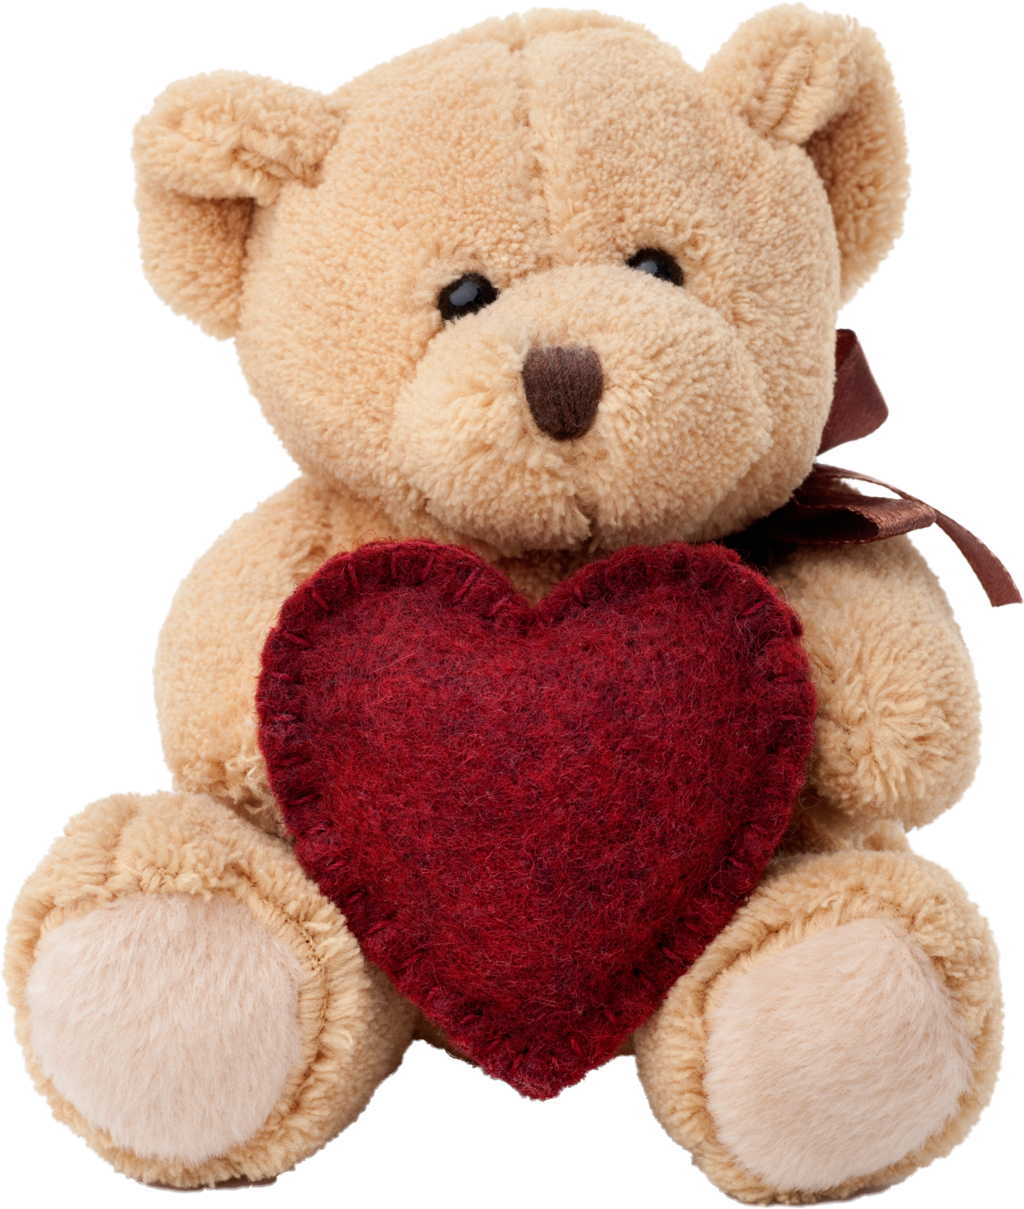 Highway of Hope rare disease support- teddy bear with heart- help for rare disease